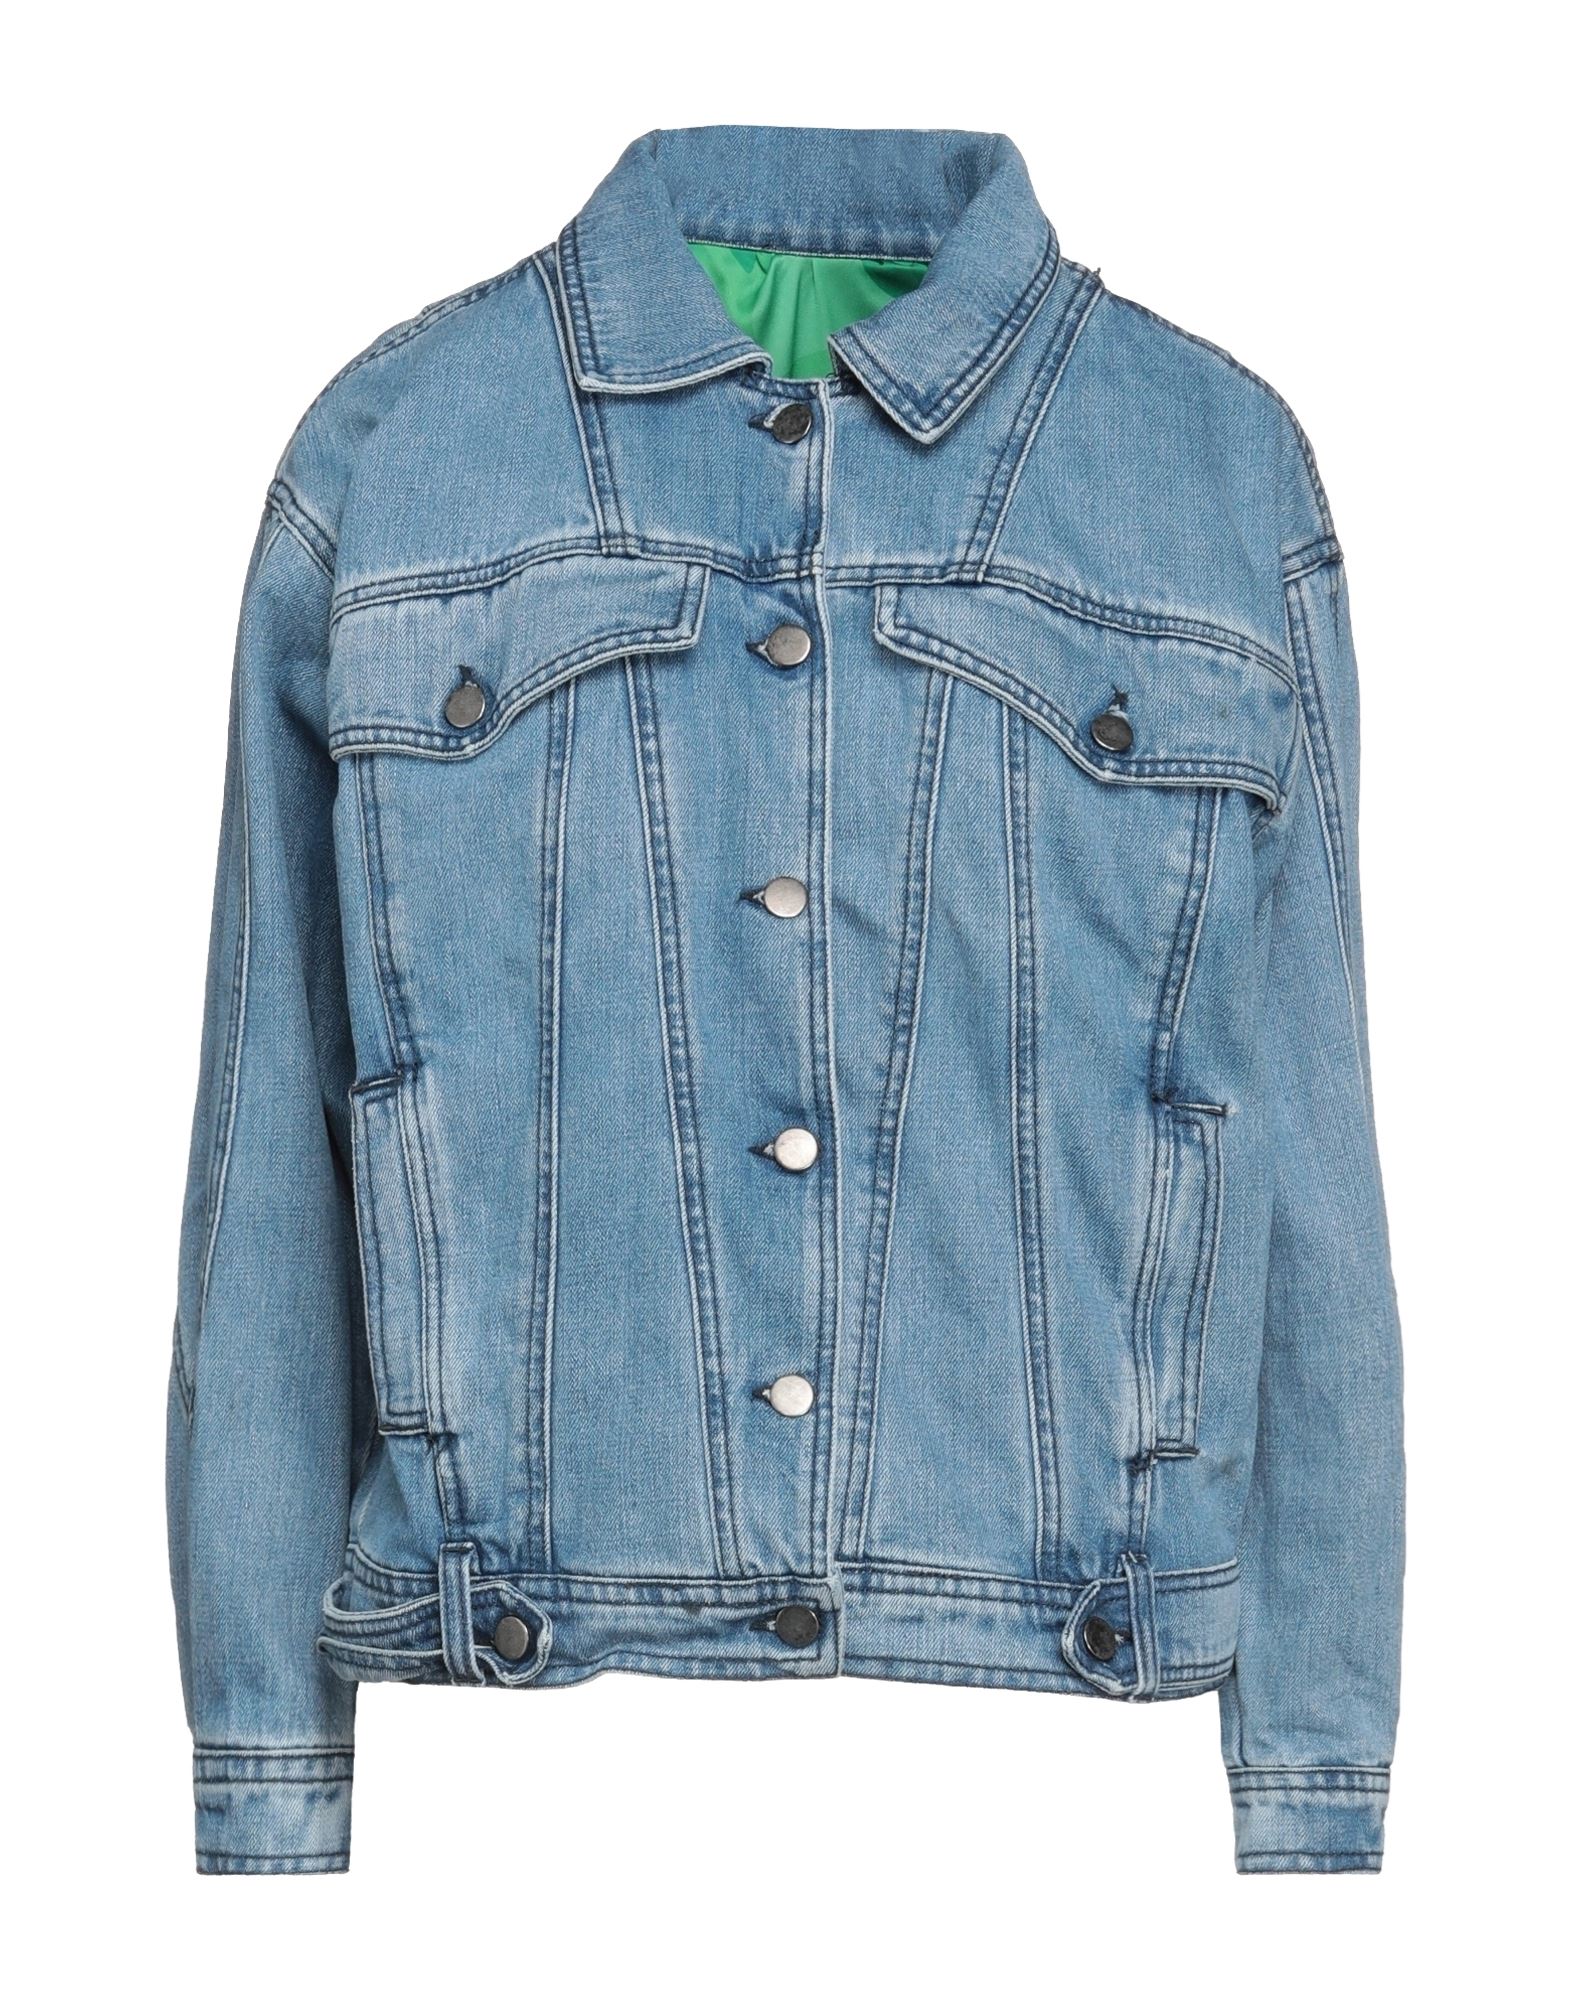 Give Me Space Denim Outerwear In Blue